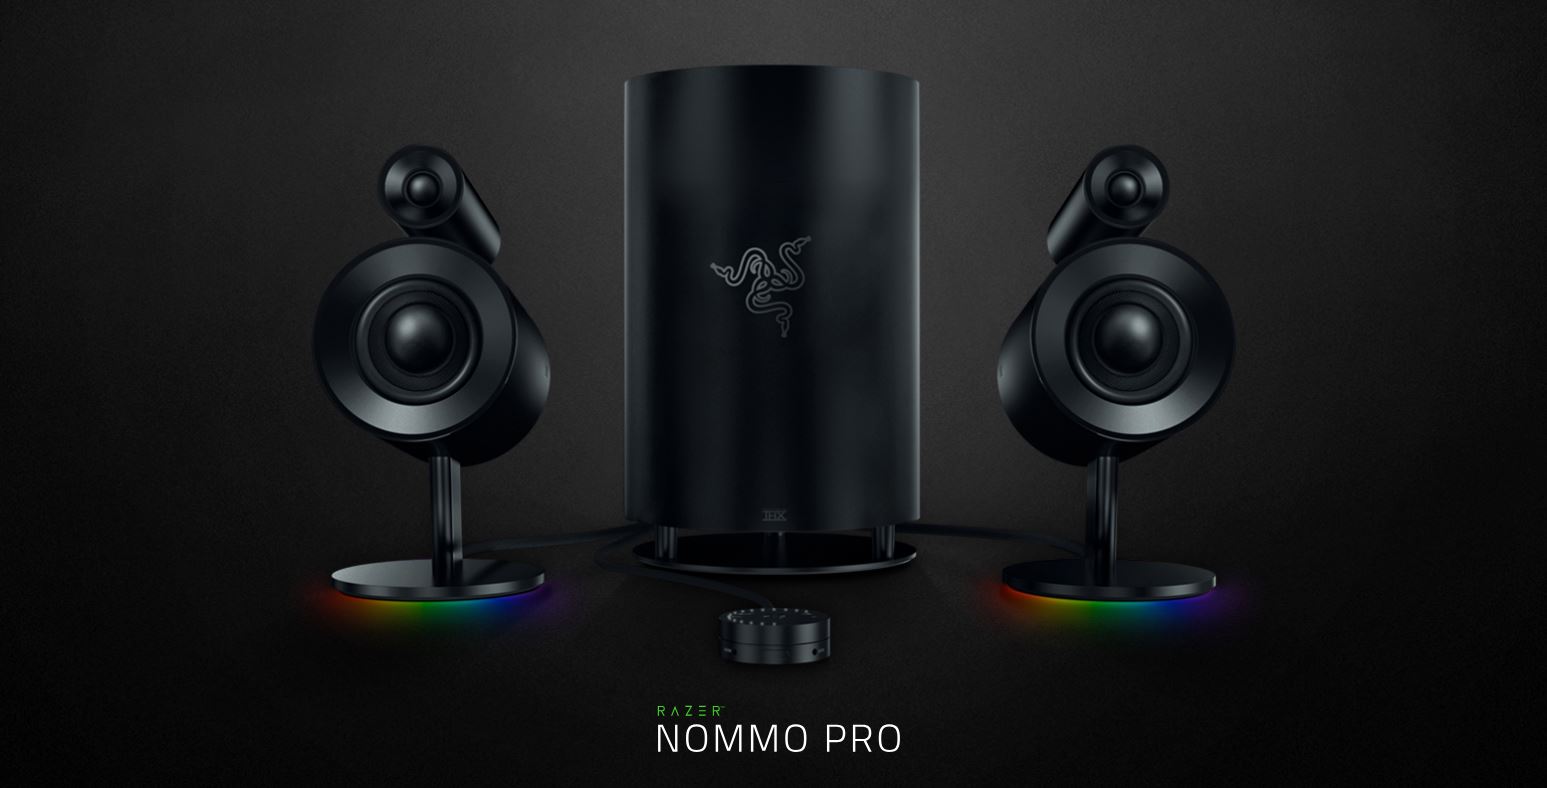 Razer’s Nommo Pro speaker system goes on sale this month